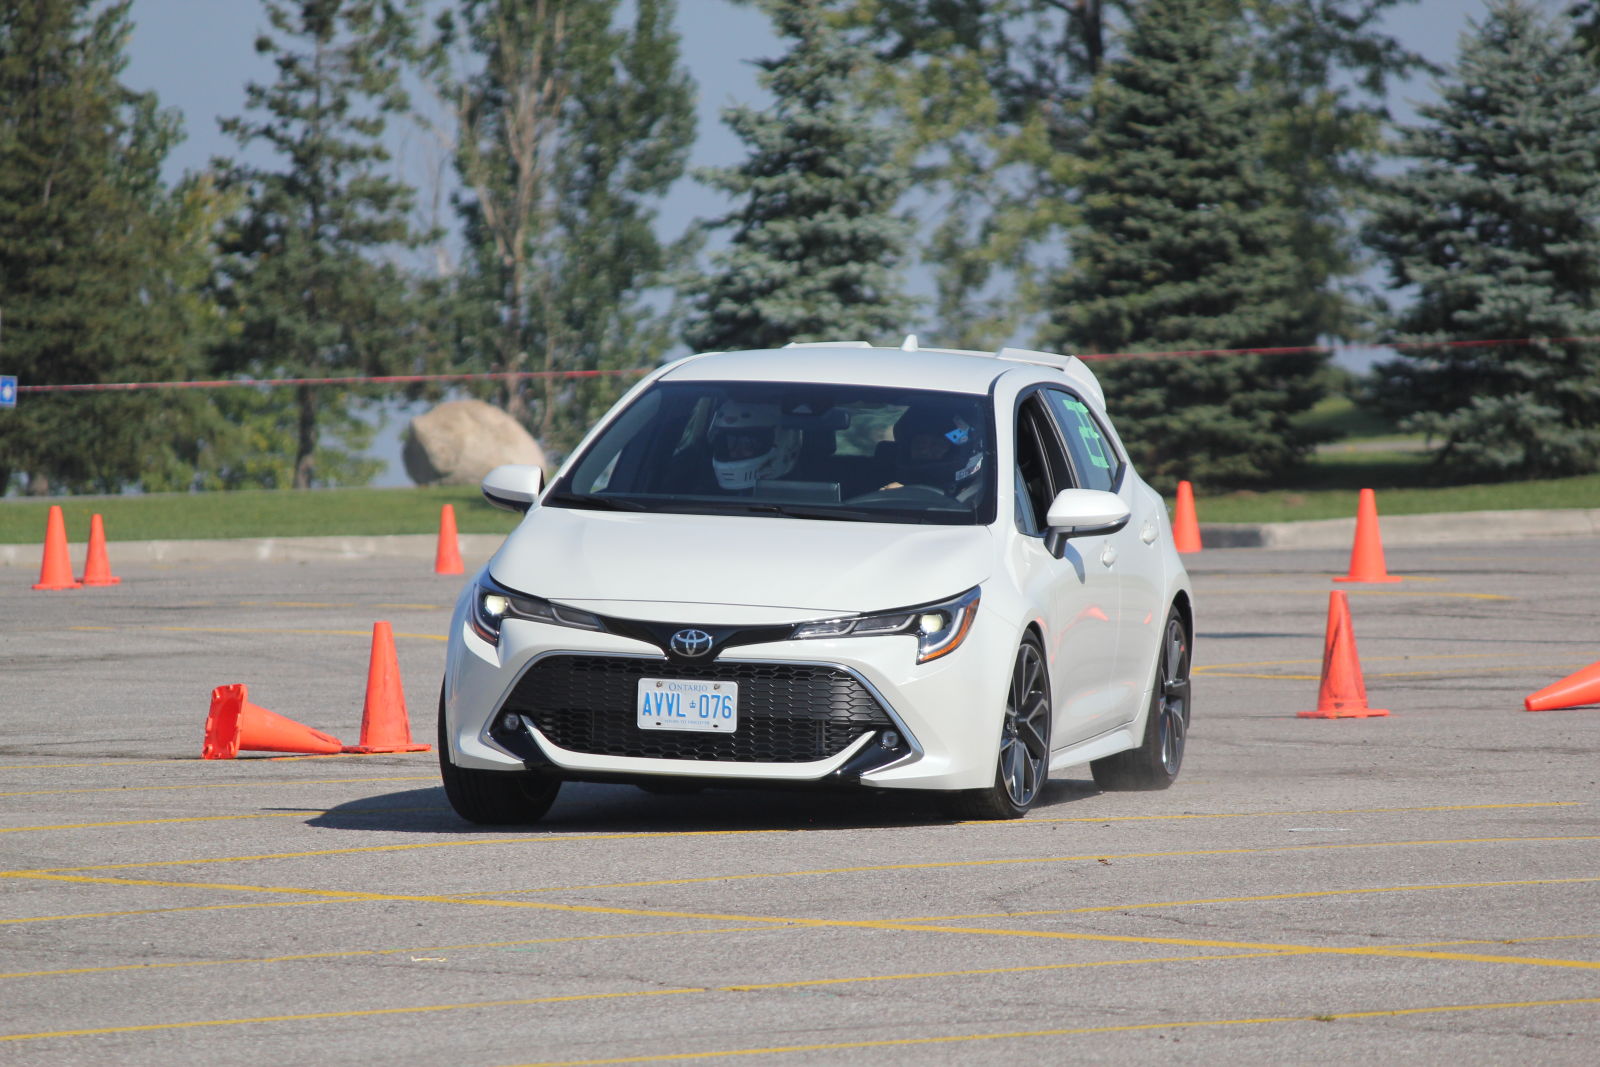 One of two 2019 Corolla Hatchbacks that competed today.